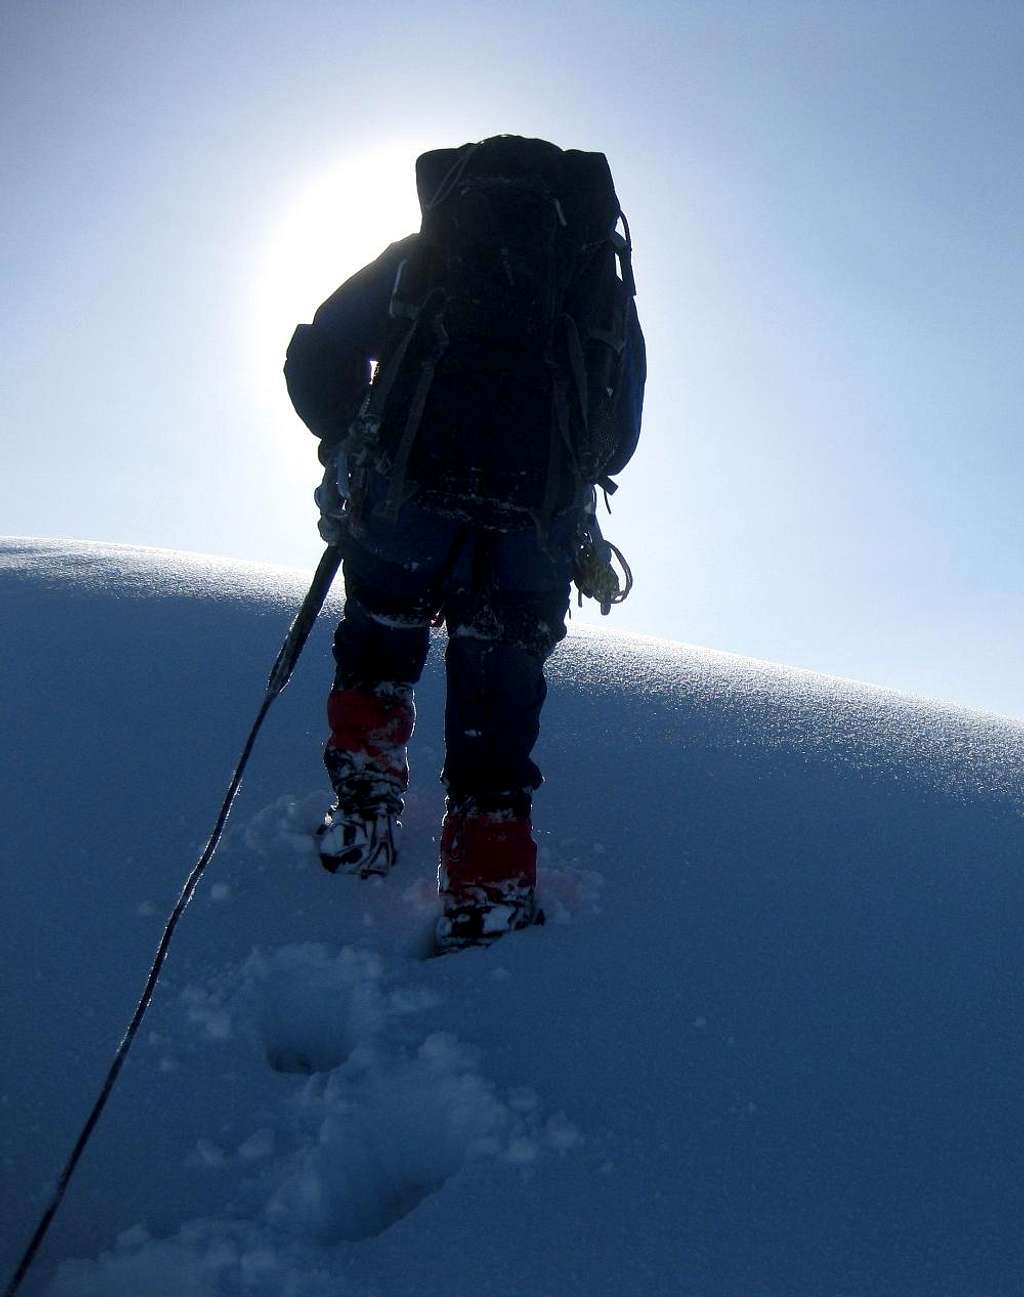 Marcial approaching the summit of Iliniza Sur